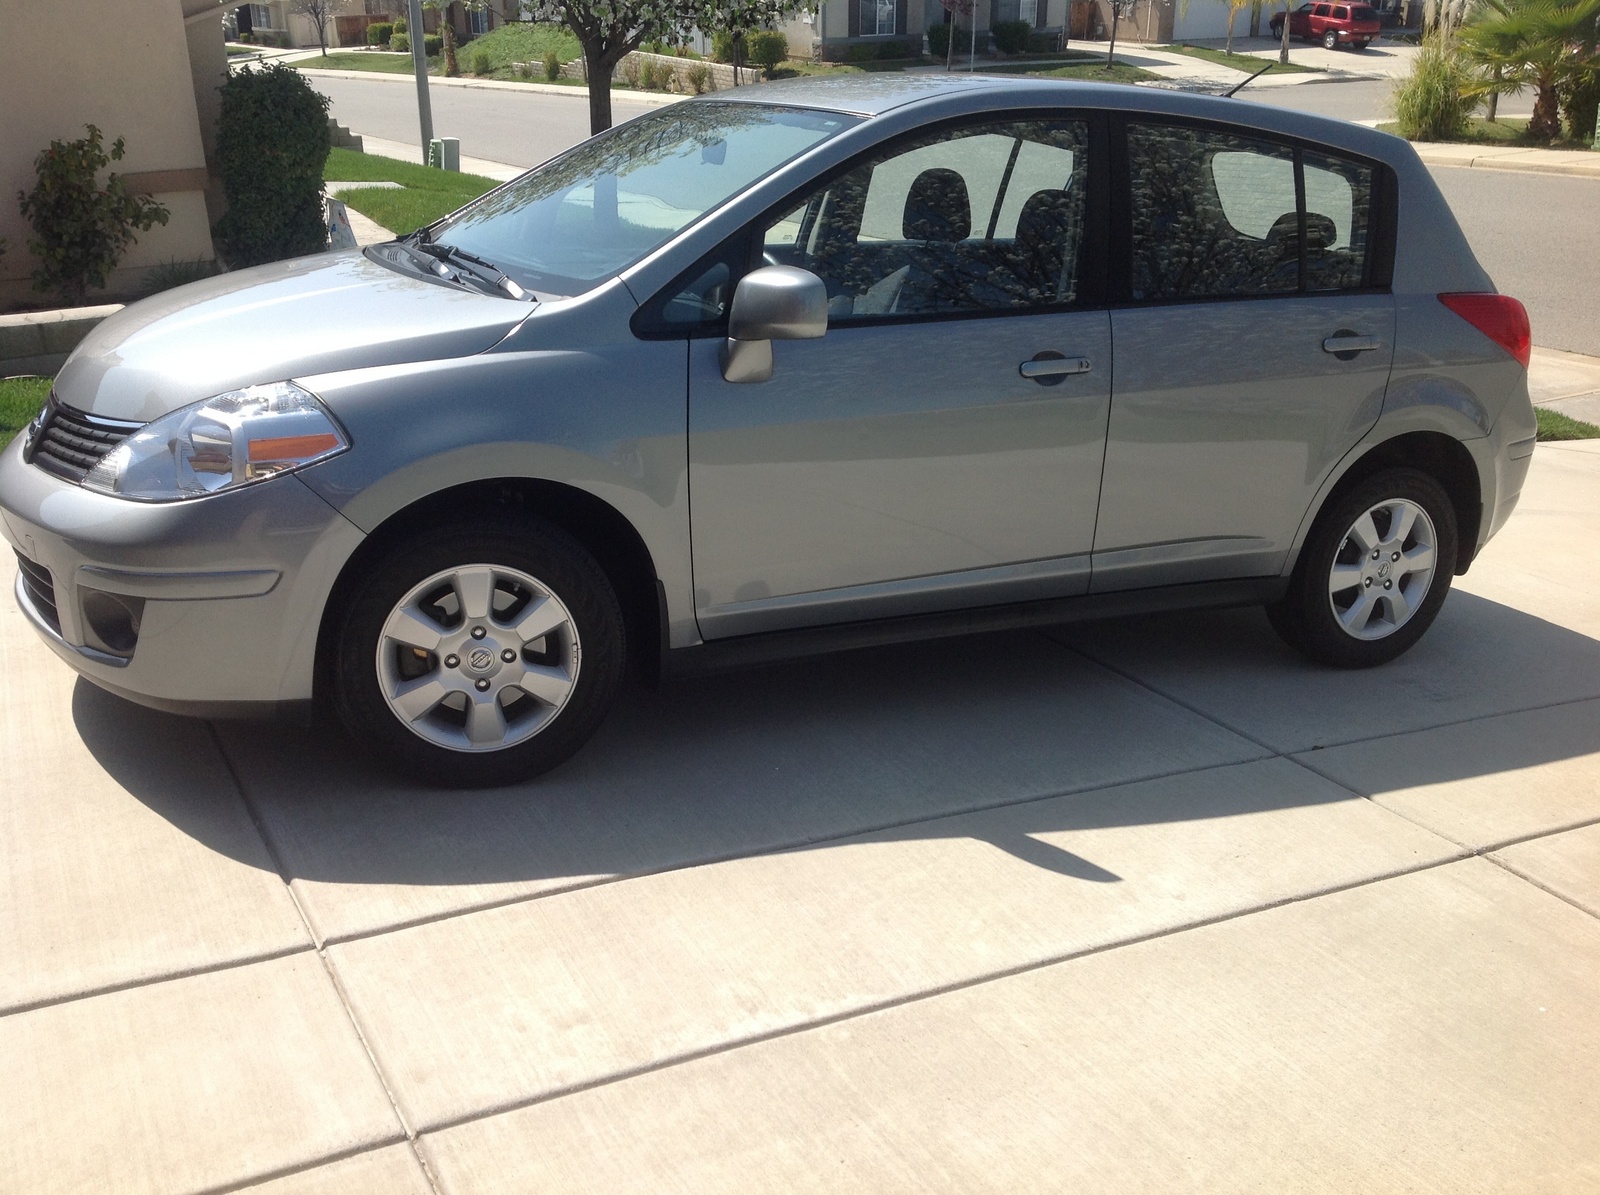 2008 Nissan versa used review #1